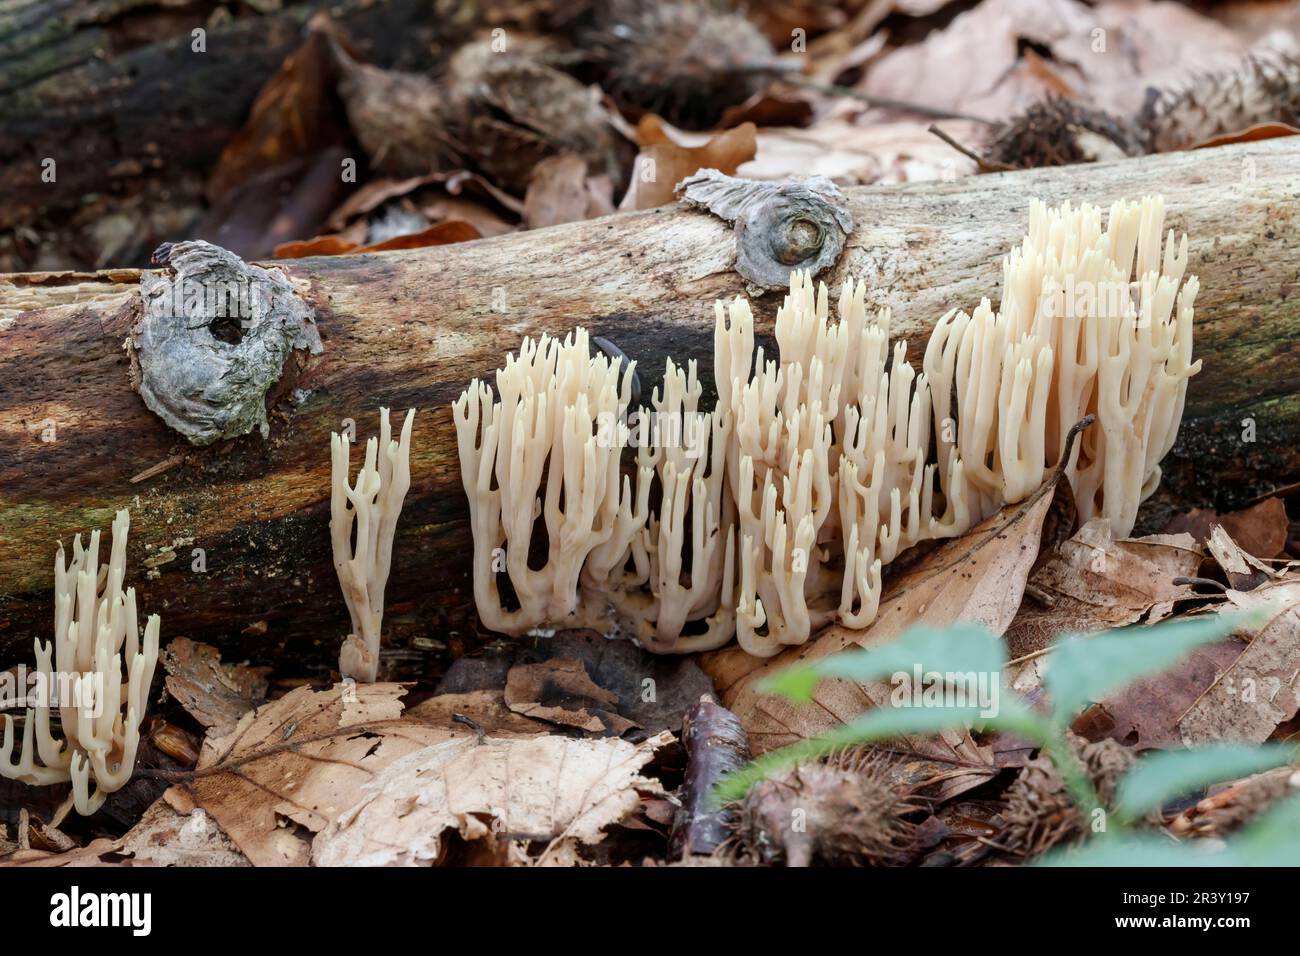 Ramaria stricta, known as Upright coral, Strict-branch coral, Coral fungi Stock Photo